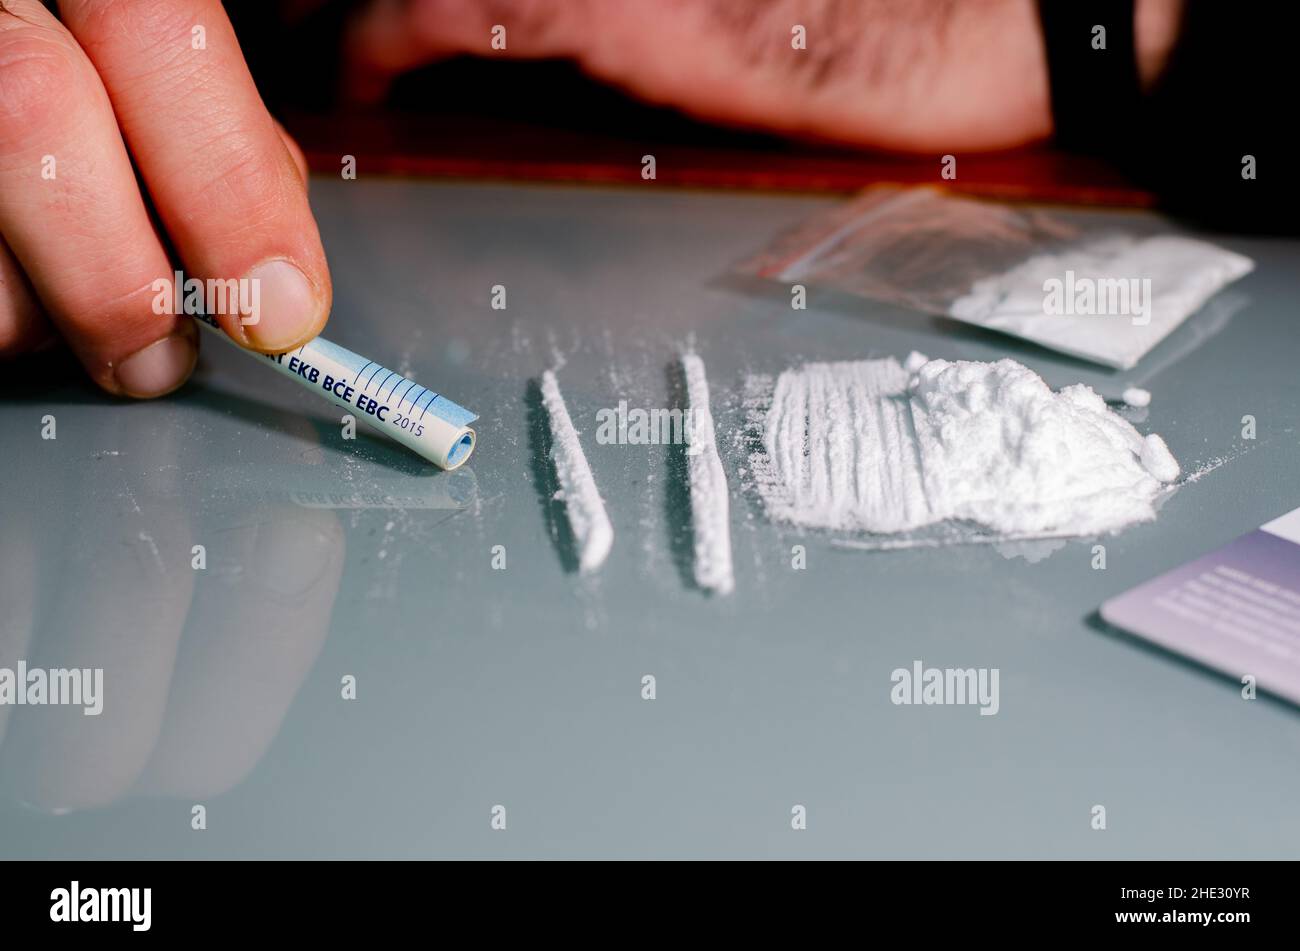 Man is about to snort cocaine with rolled up banknote. Narcotics concept. Stock Photo